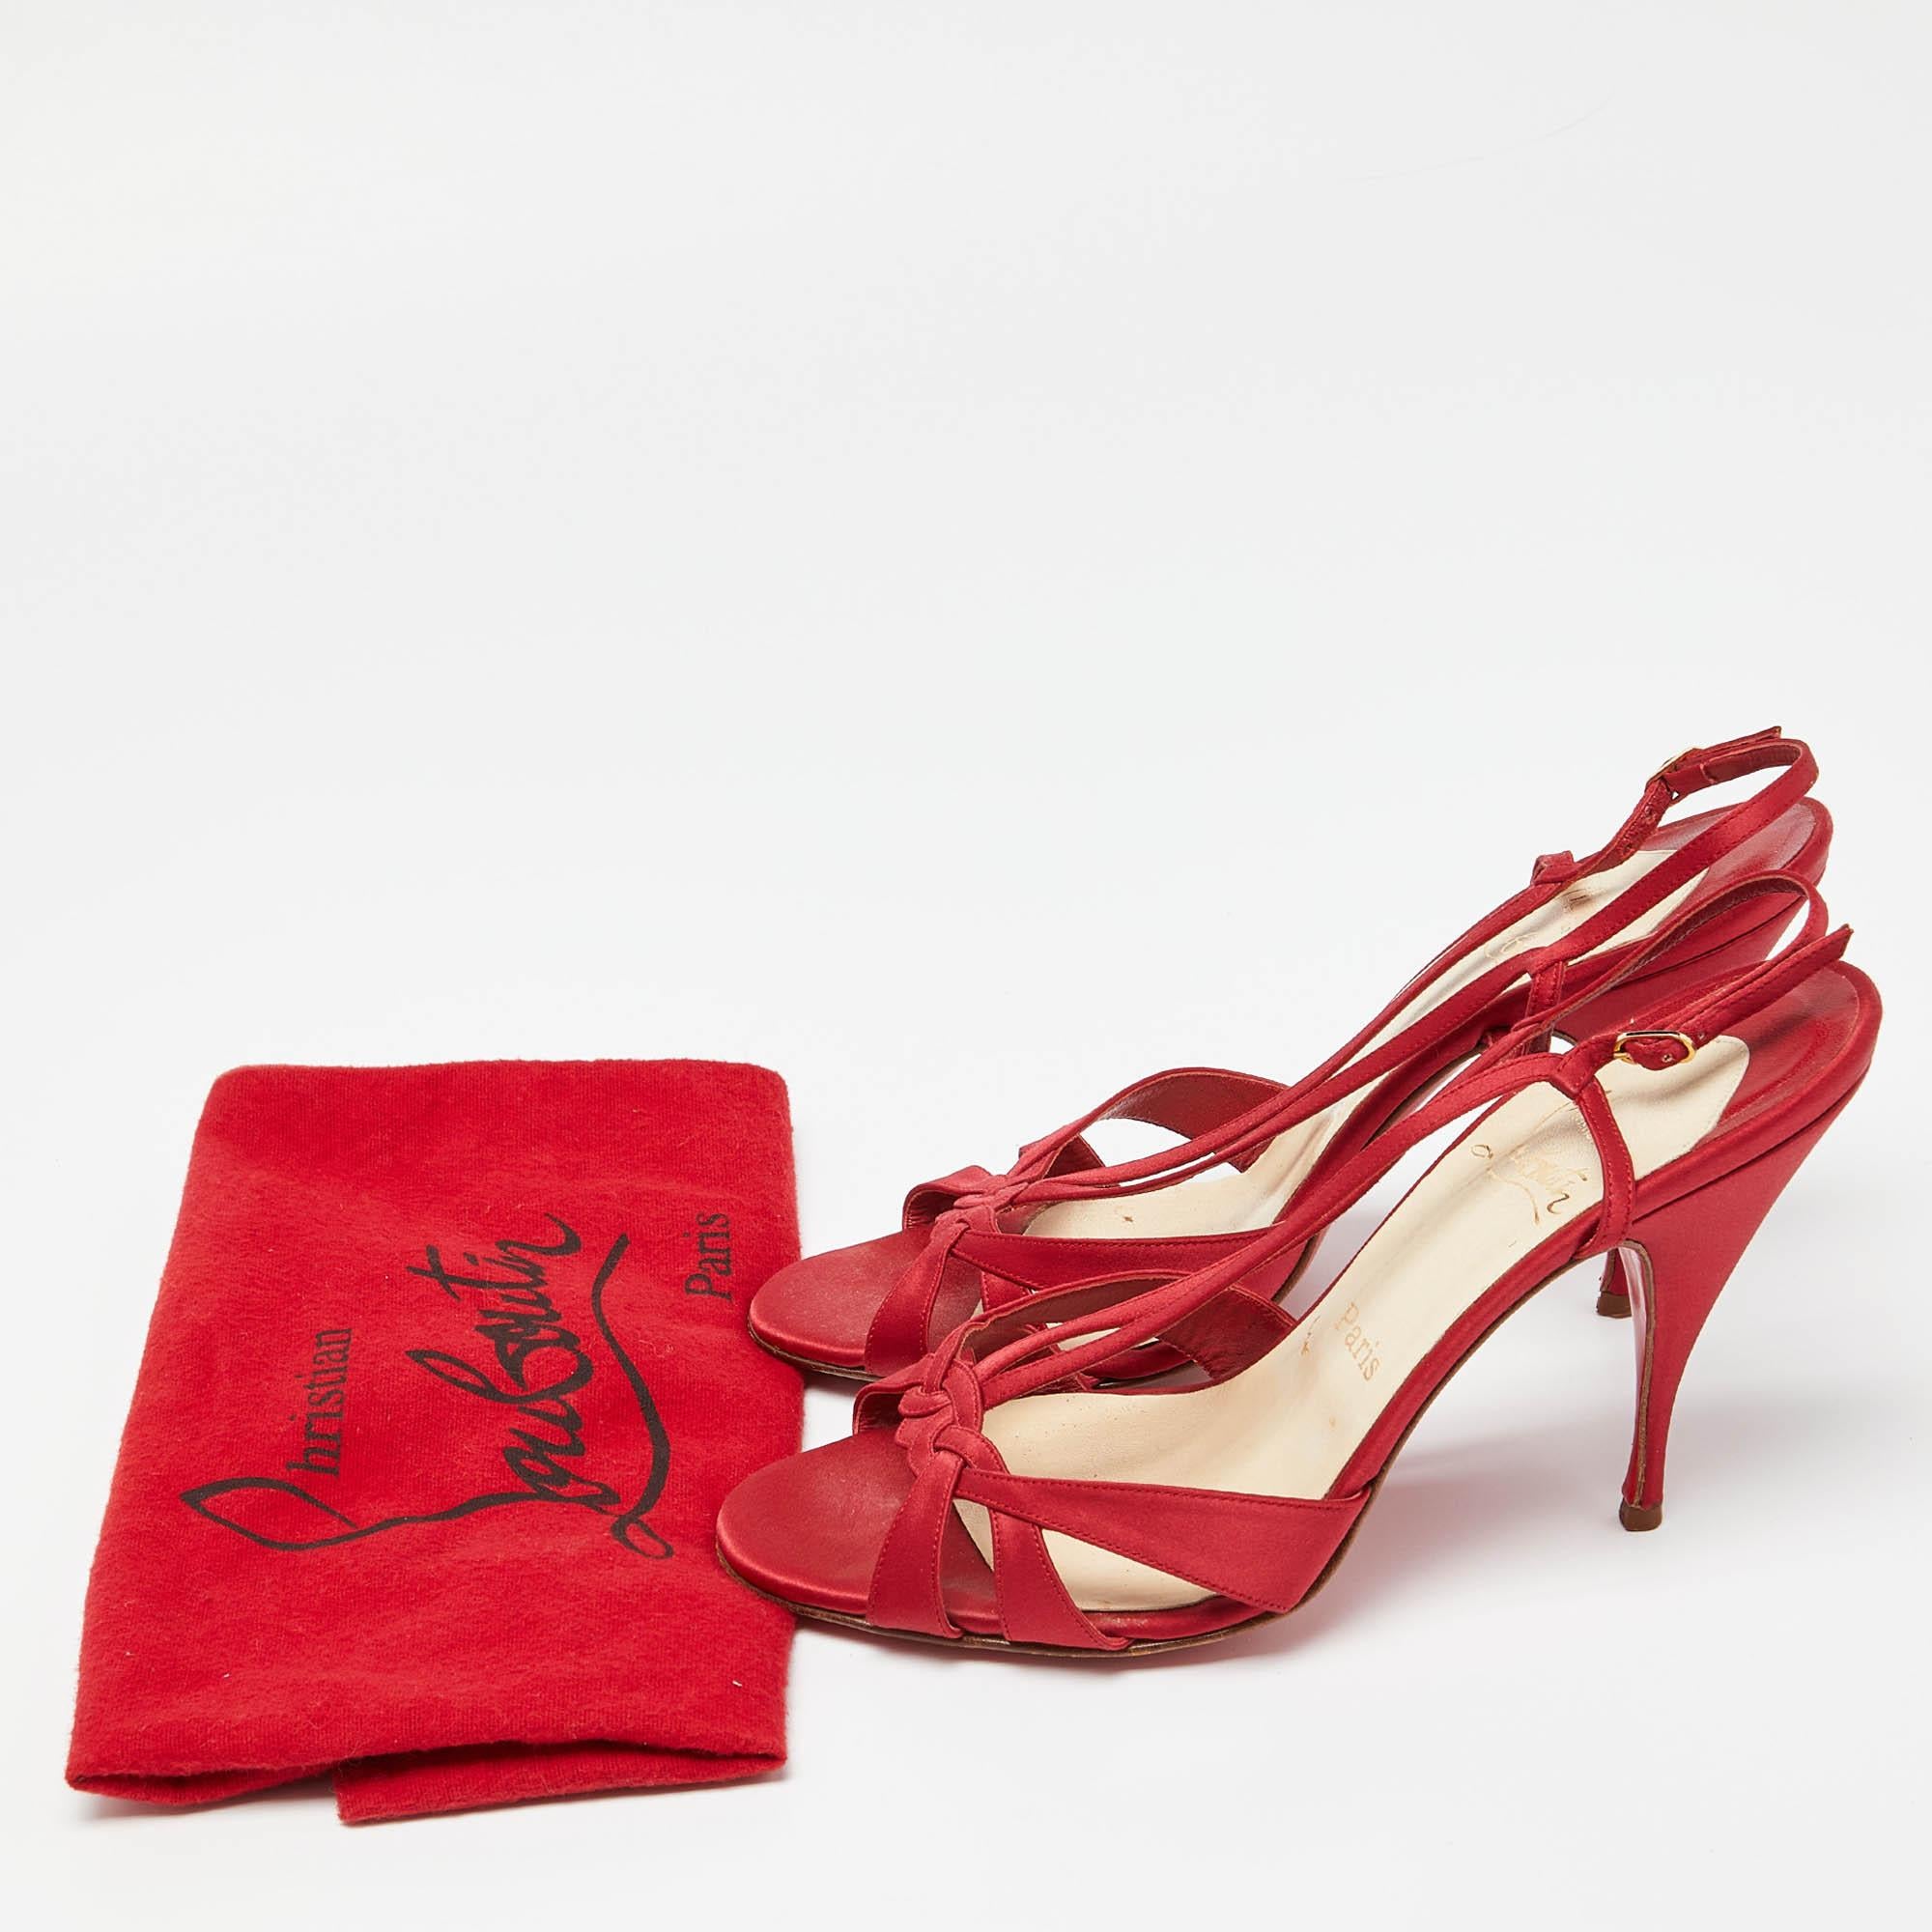 Christian Louboutin Red Satin Buckle Slingback Sandals Size 41 For Sale 5